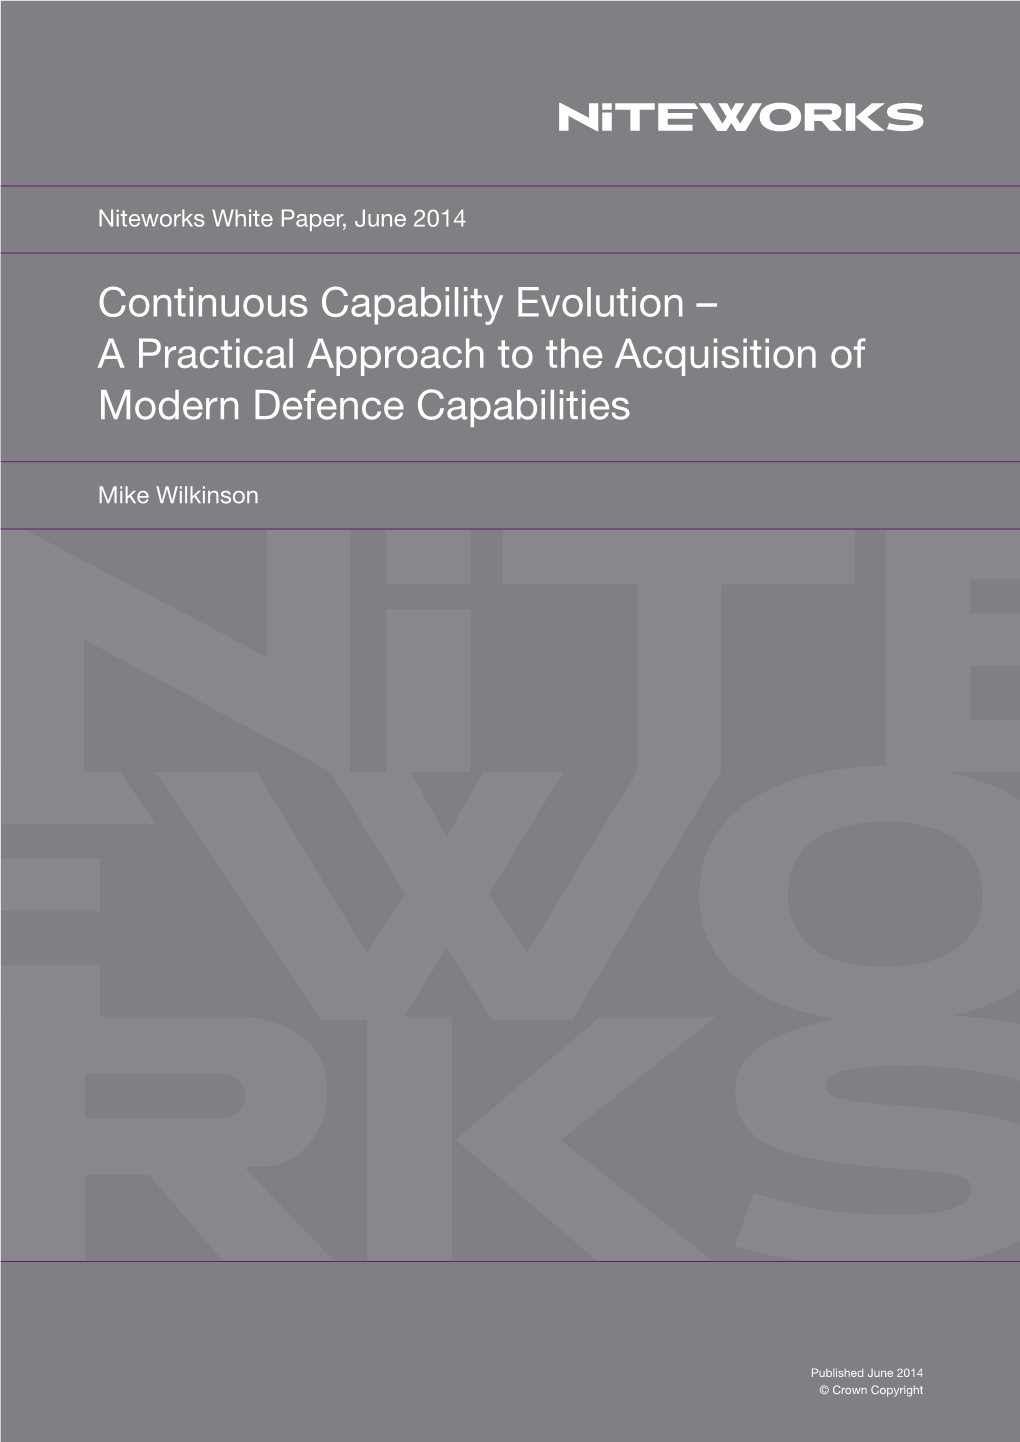 Continuous Capability Evolution – a Practical Approach to the Acquisition of Modern Defence Capabilities